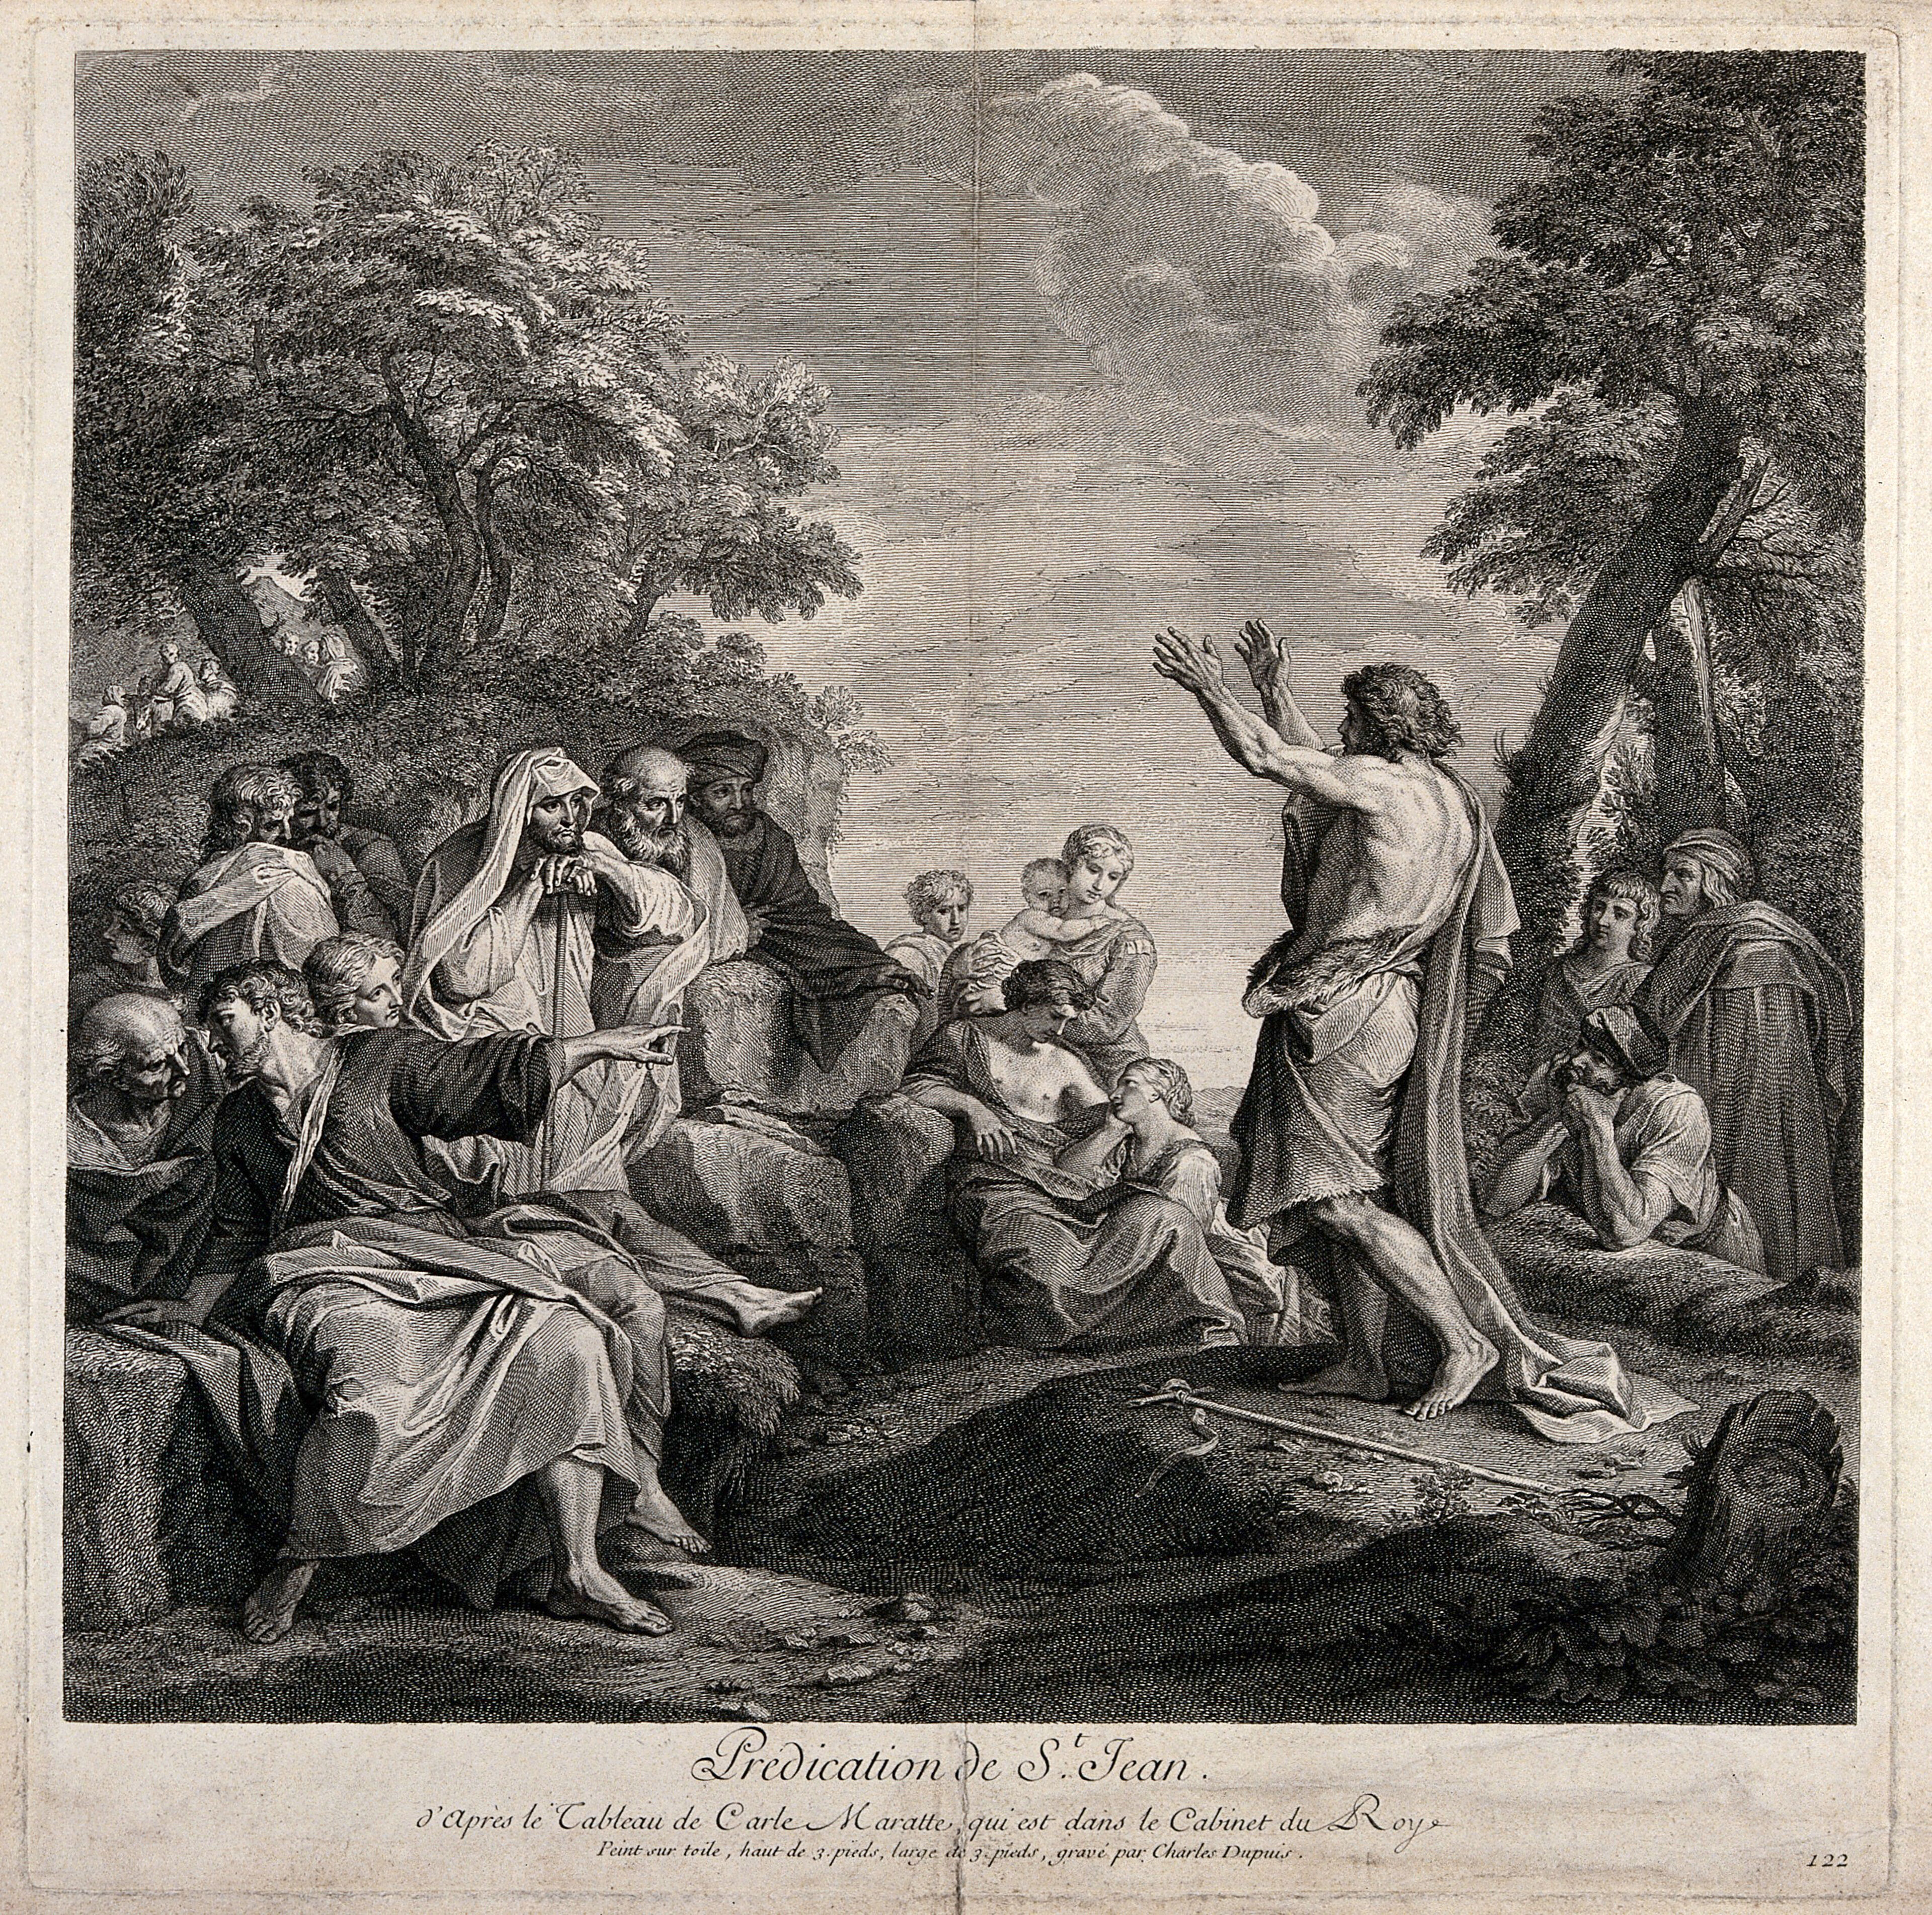 John the Baptist preaches in the wilderness. Etching by C. Dupuis after C. Maratta.